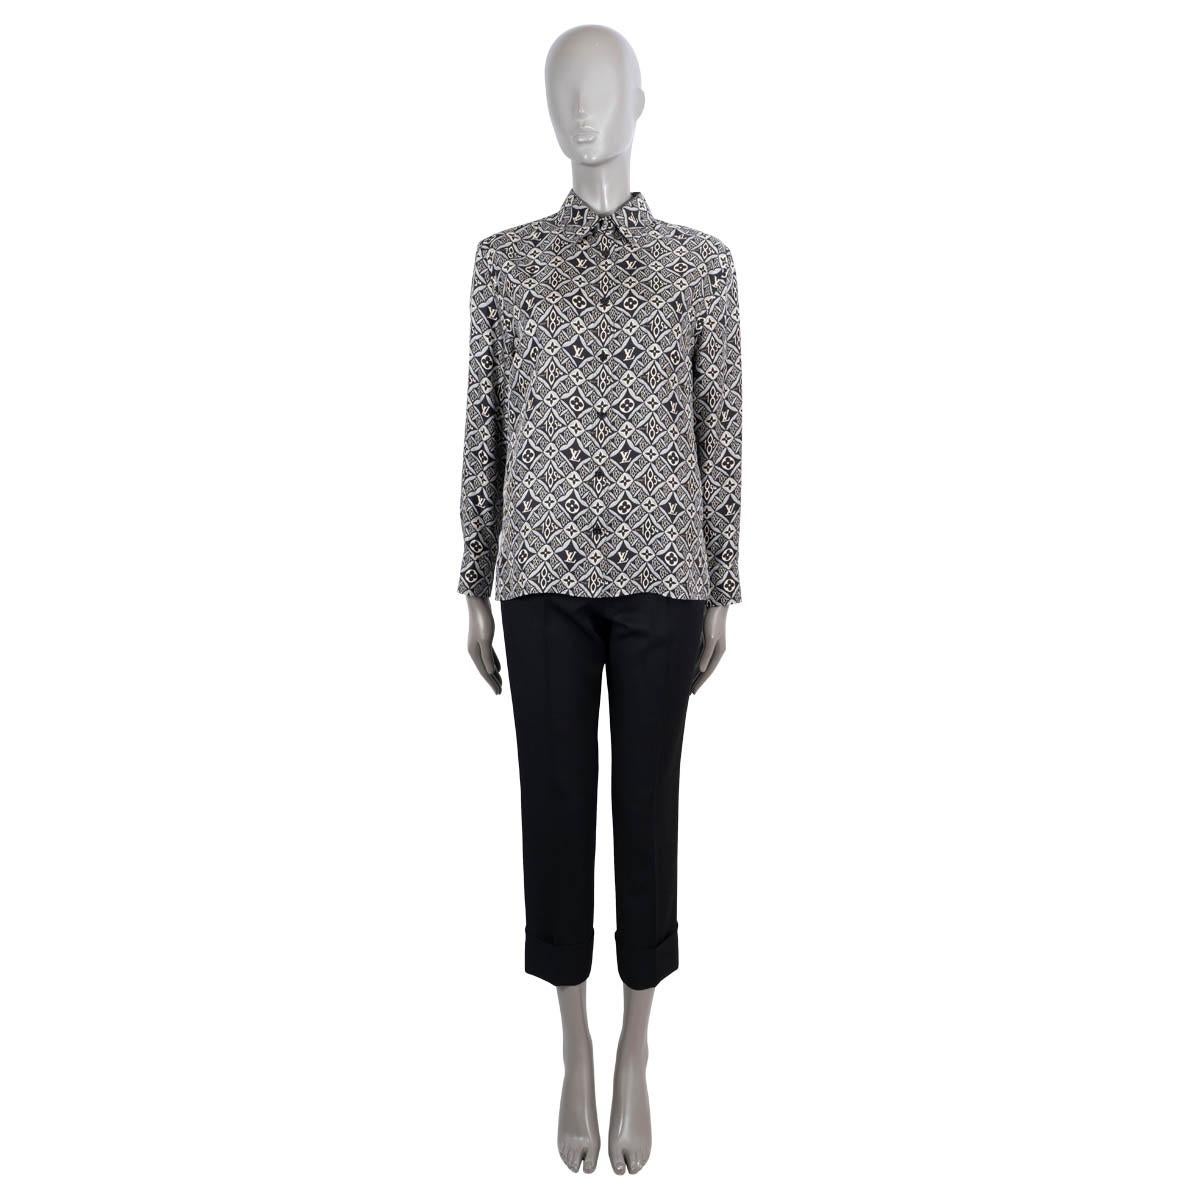 100% authentic Louis Vuitton Since 1843 blouse in black and ivory silk (100%).  Features all-over monogram print and pointed collar. Closes with buttons down the front. Has been worn and is in excellent condition.

2020 Fall/Winter

As seen on